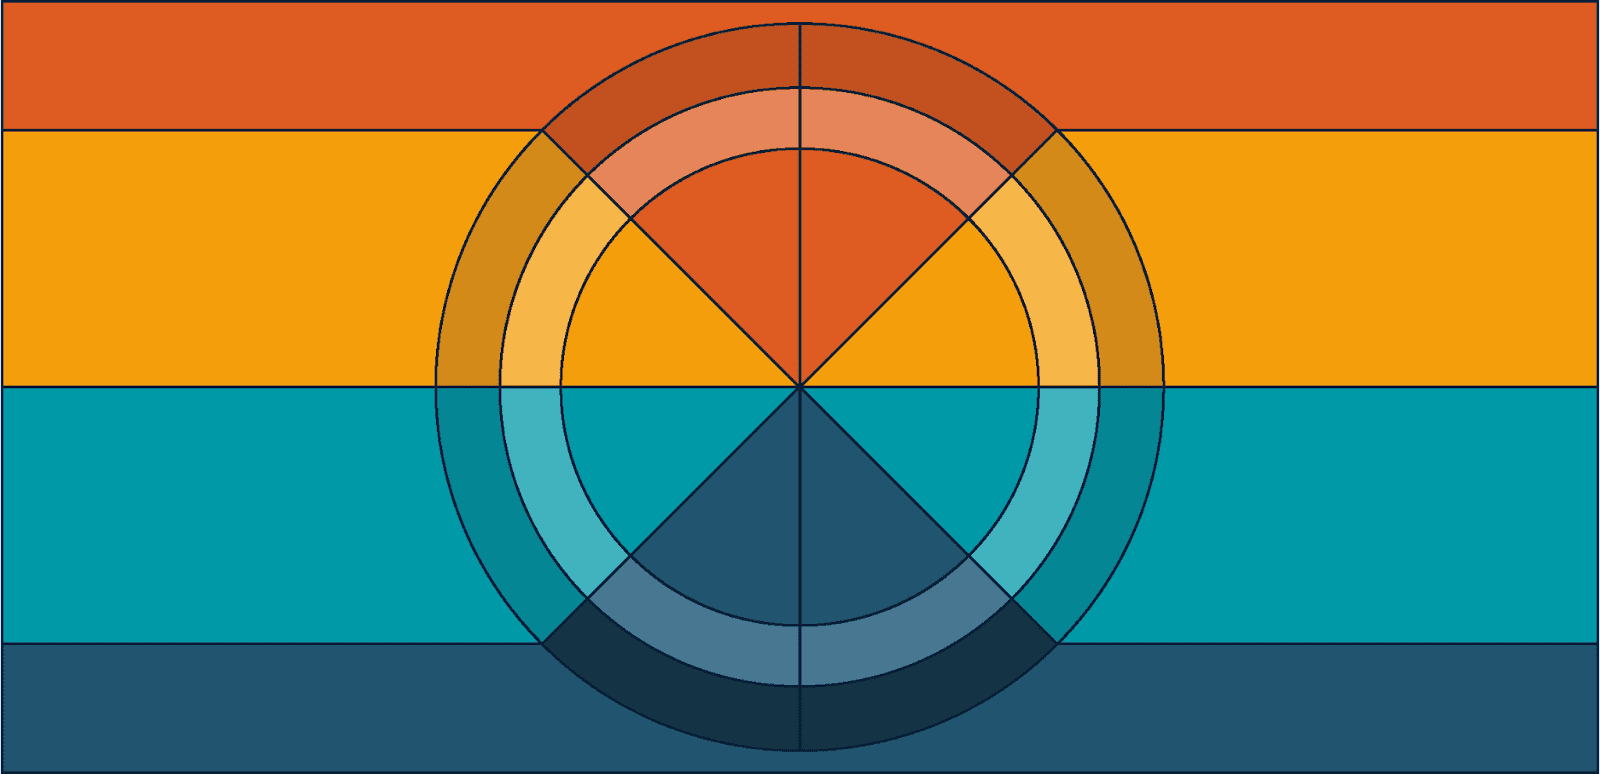 Illustration of a nested circle chart with slices of different colors and shades